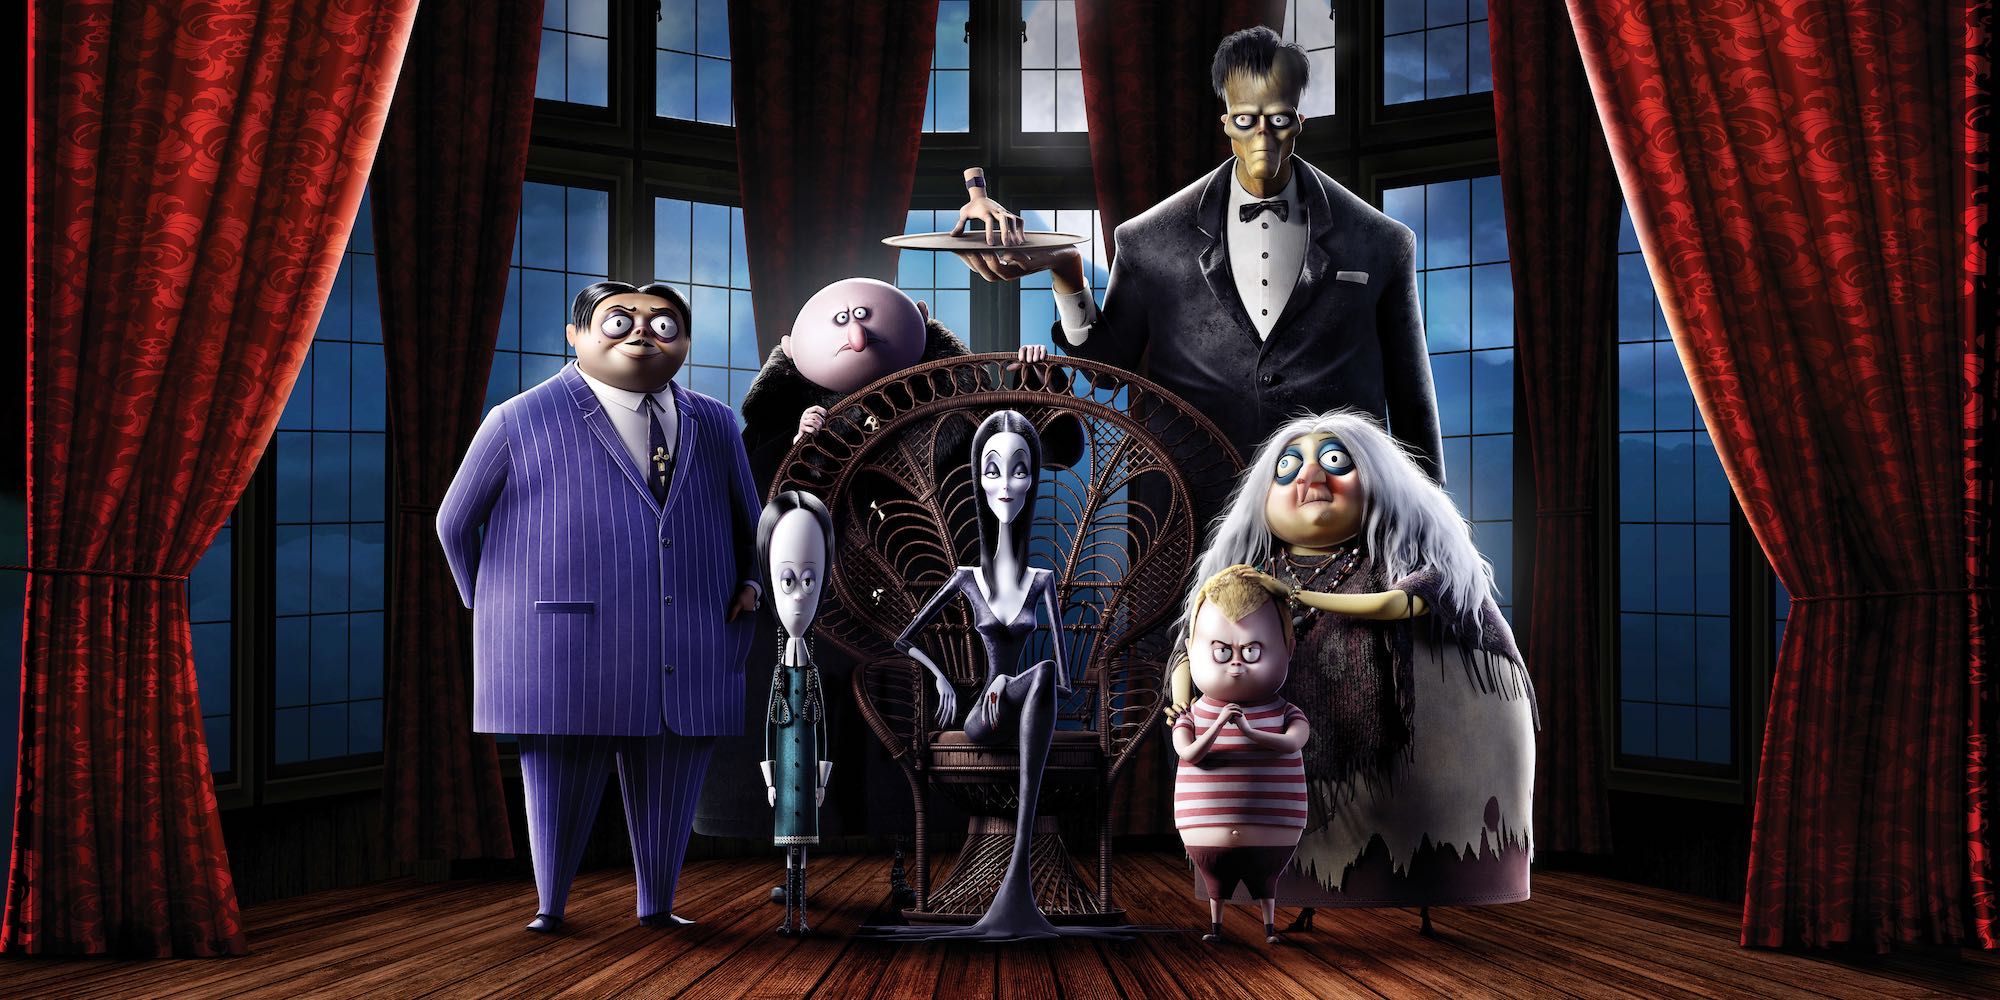 Addams Family: 5 Things The Animated Movie Got Right (And 5 It Got Wrong)